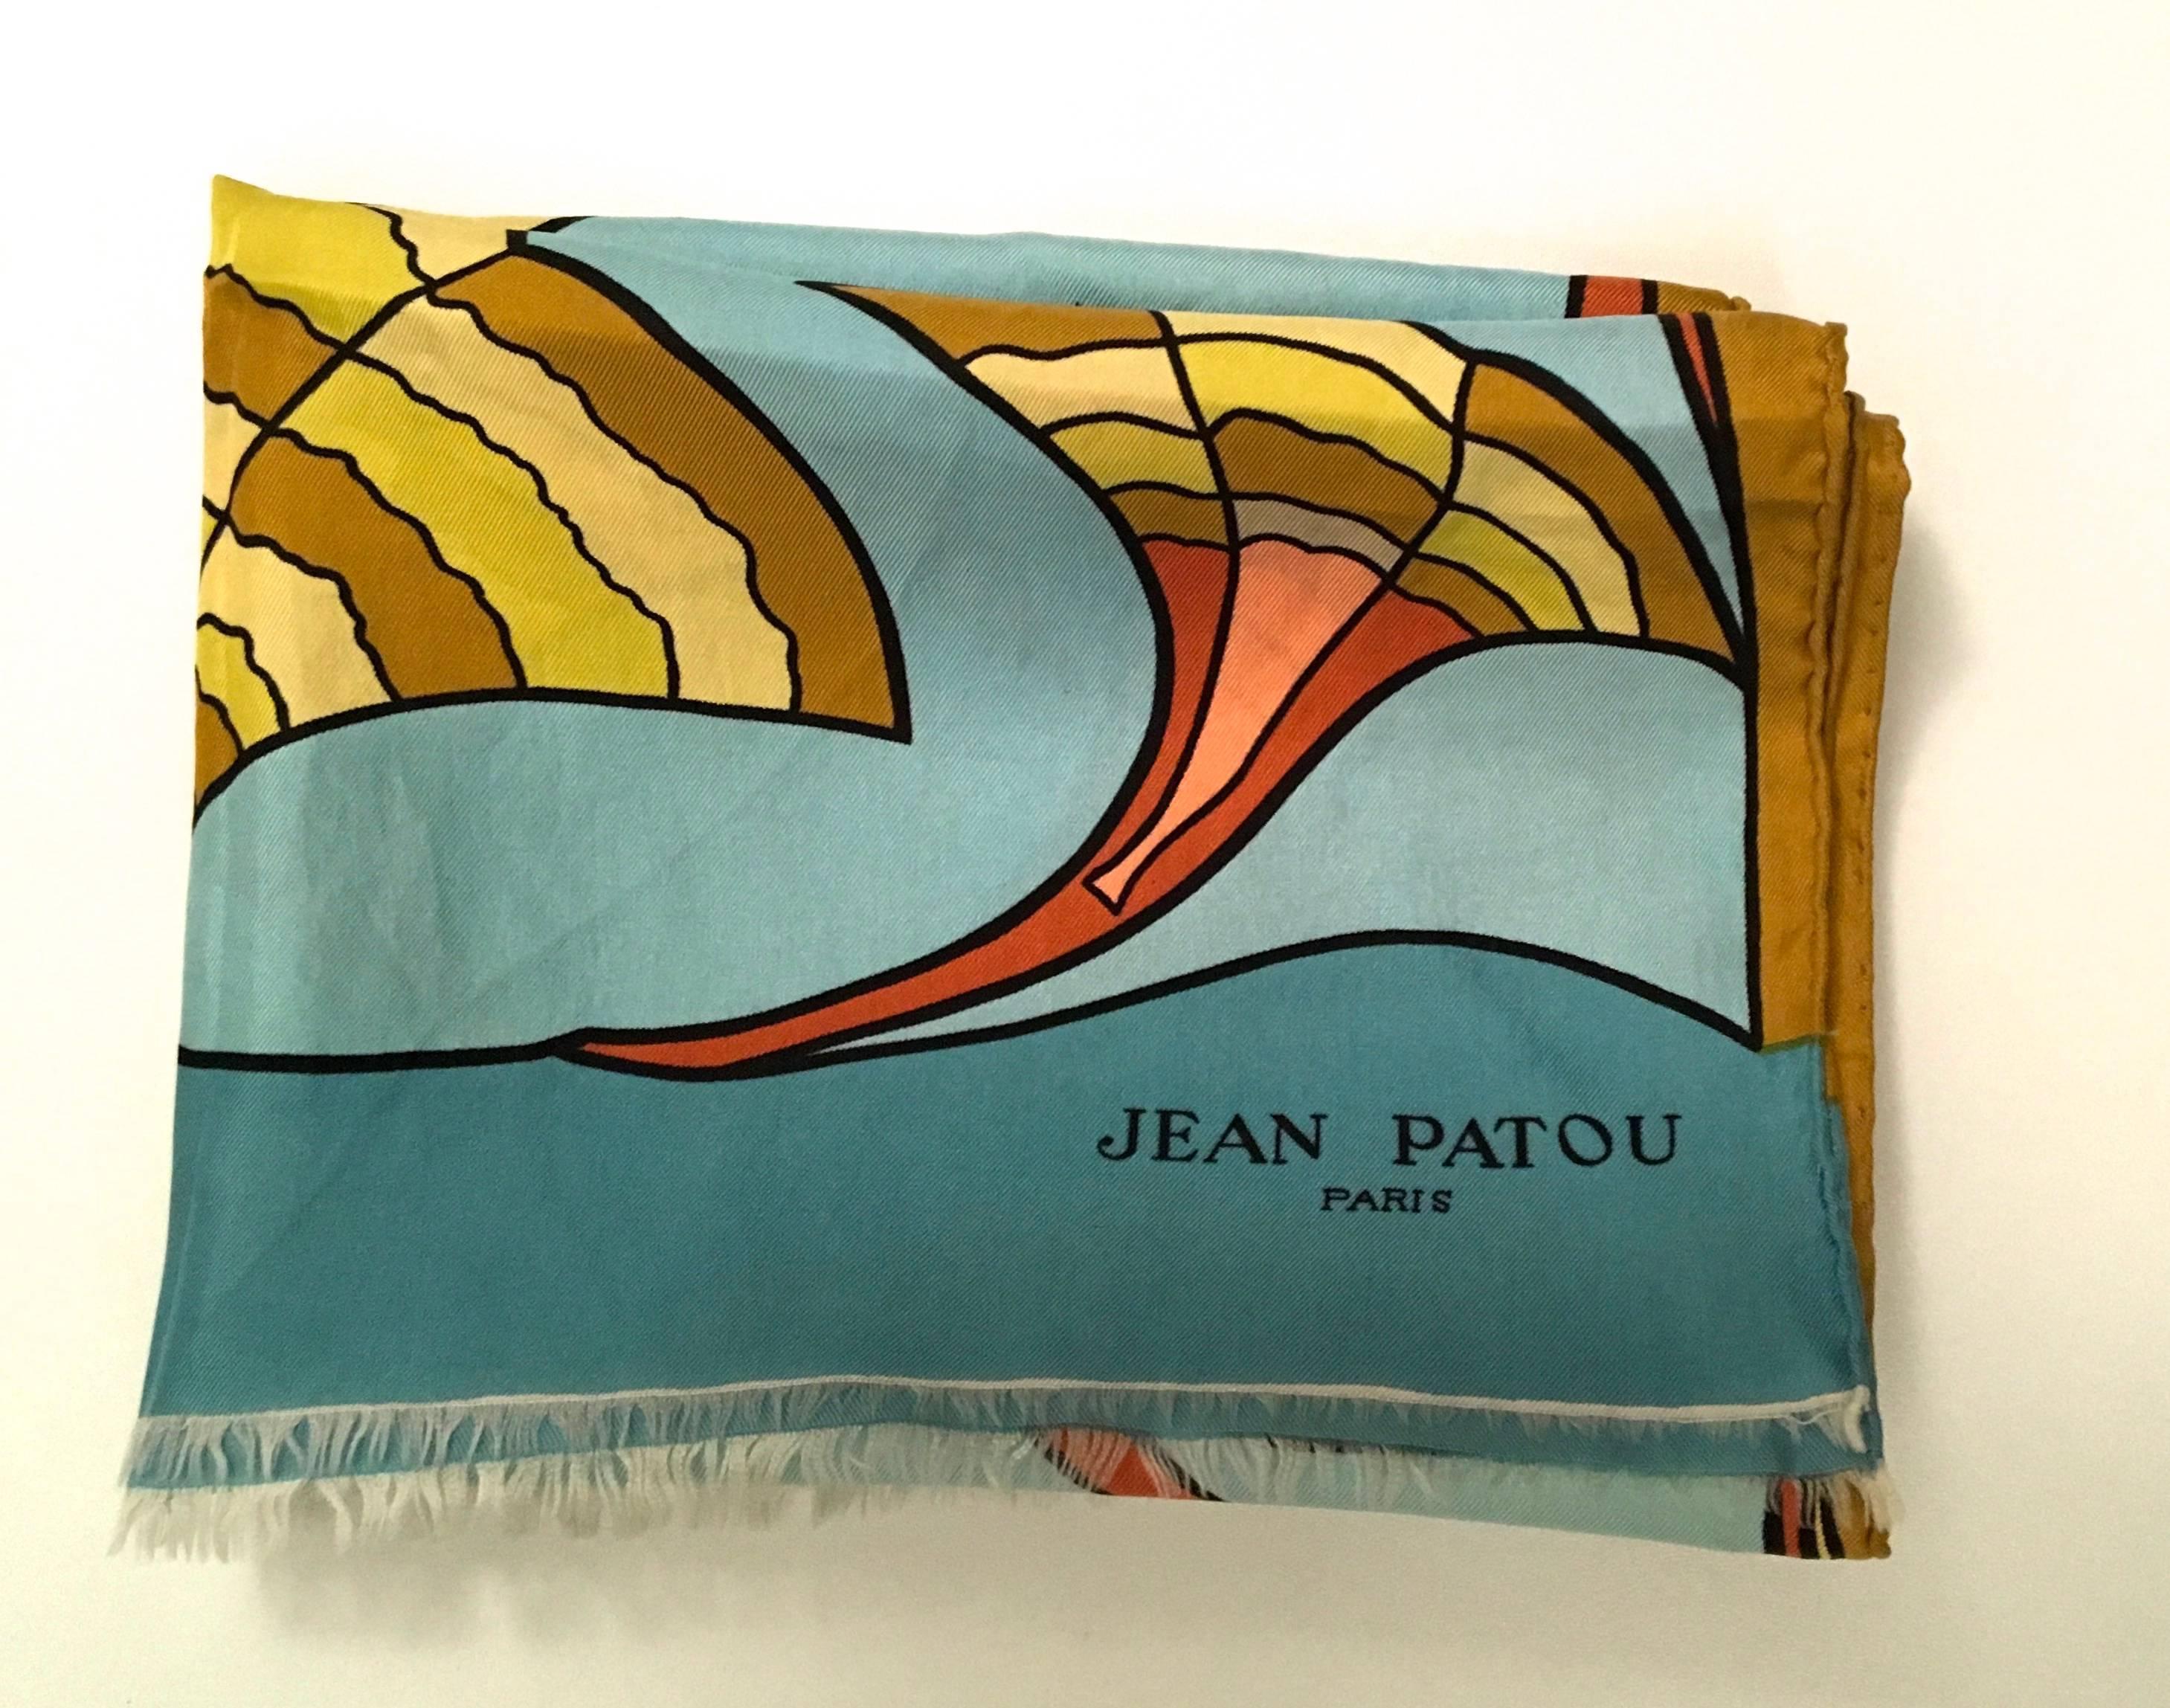 Presented here is a vintage scarf from Jean Patou. This rare scarf is from the late 1960's and is in excellent to near mint condition. The scarf design is comprised of a curved geometric pattern in shades of gold, rust, peach and blue. 

The scarf